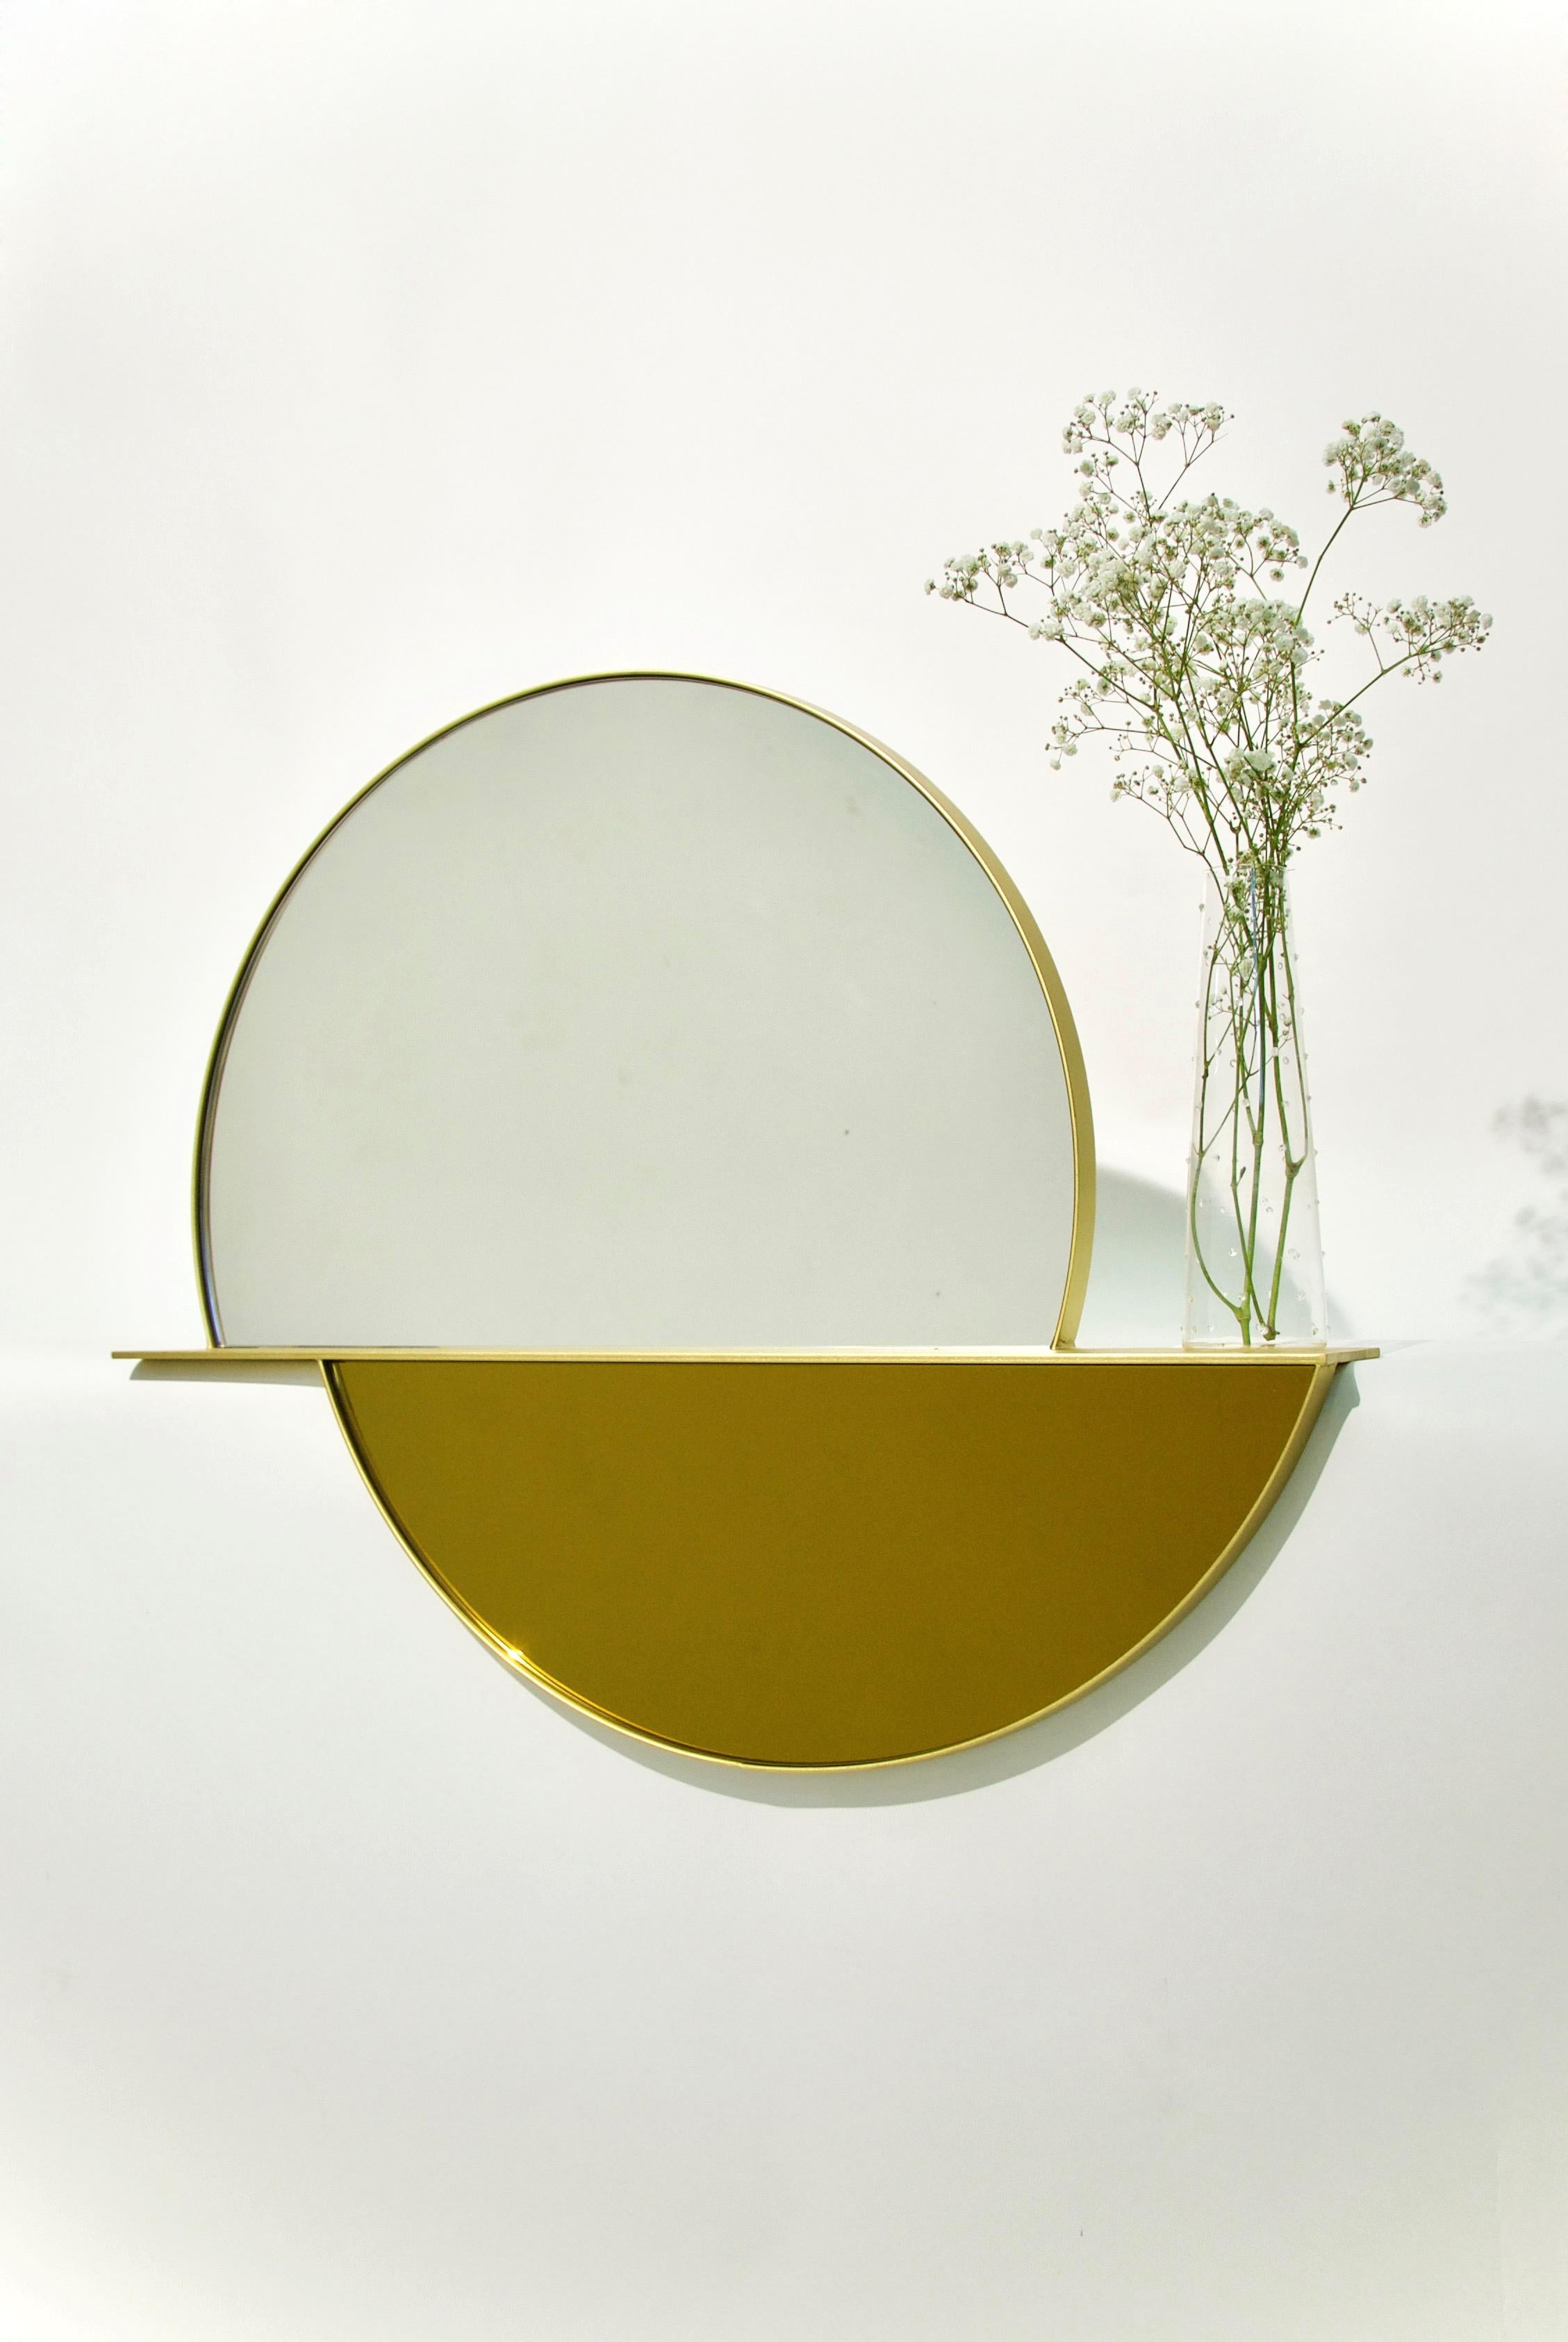 Décalé mirror by Helder Barbosa
Materials: brass
Dimensions: 90 x 80 x 15 cm

Trained as a craftsman (école Boulle, 2014), Helder Barbosa is a designer who lives and works in Paris.
Attracted by minimalist shapes, he creates furniture with soft